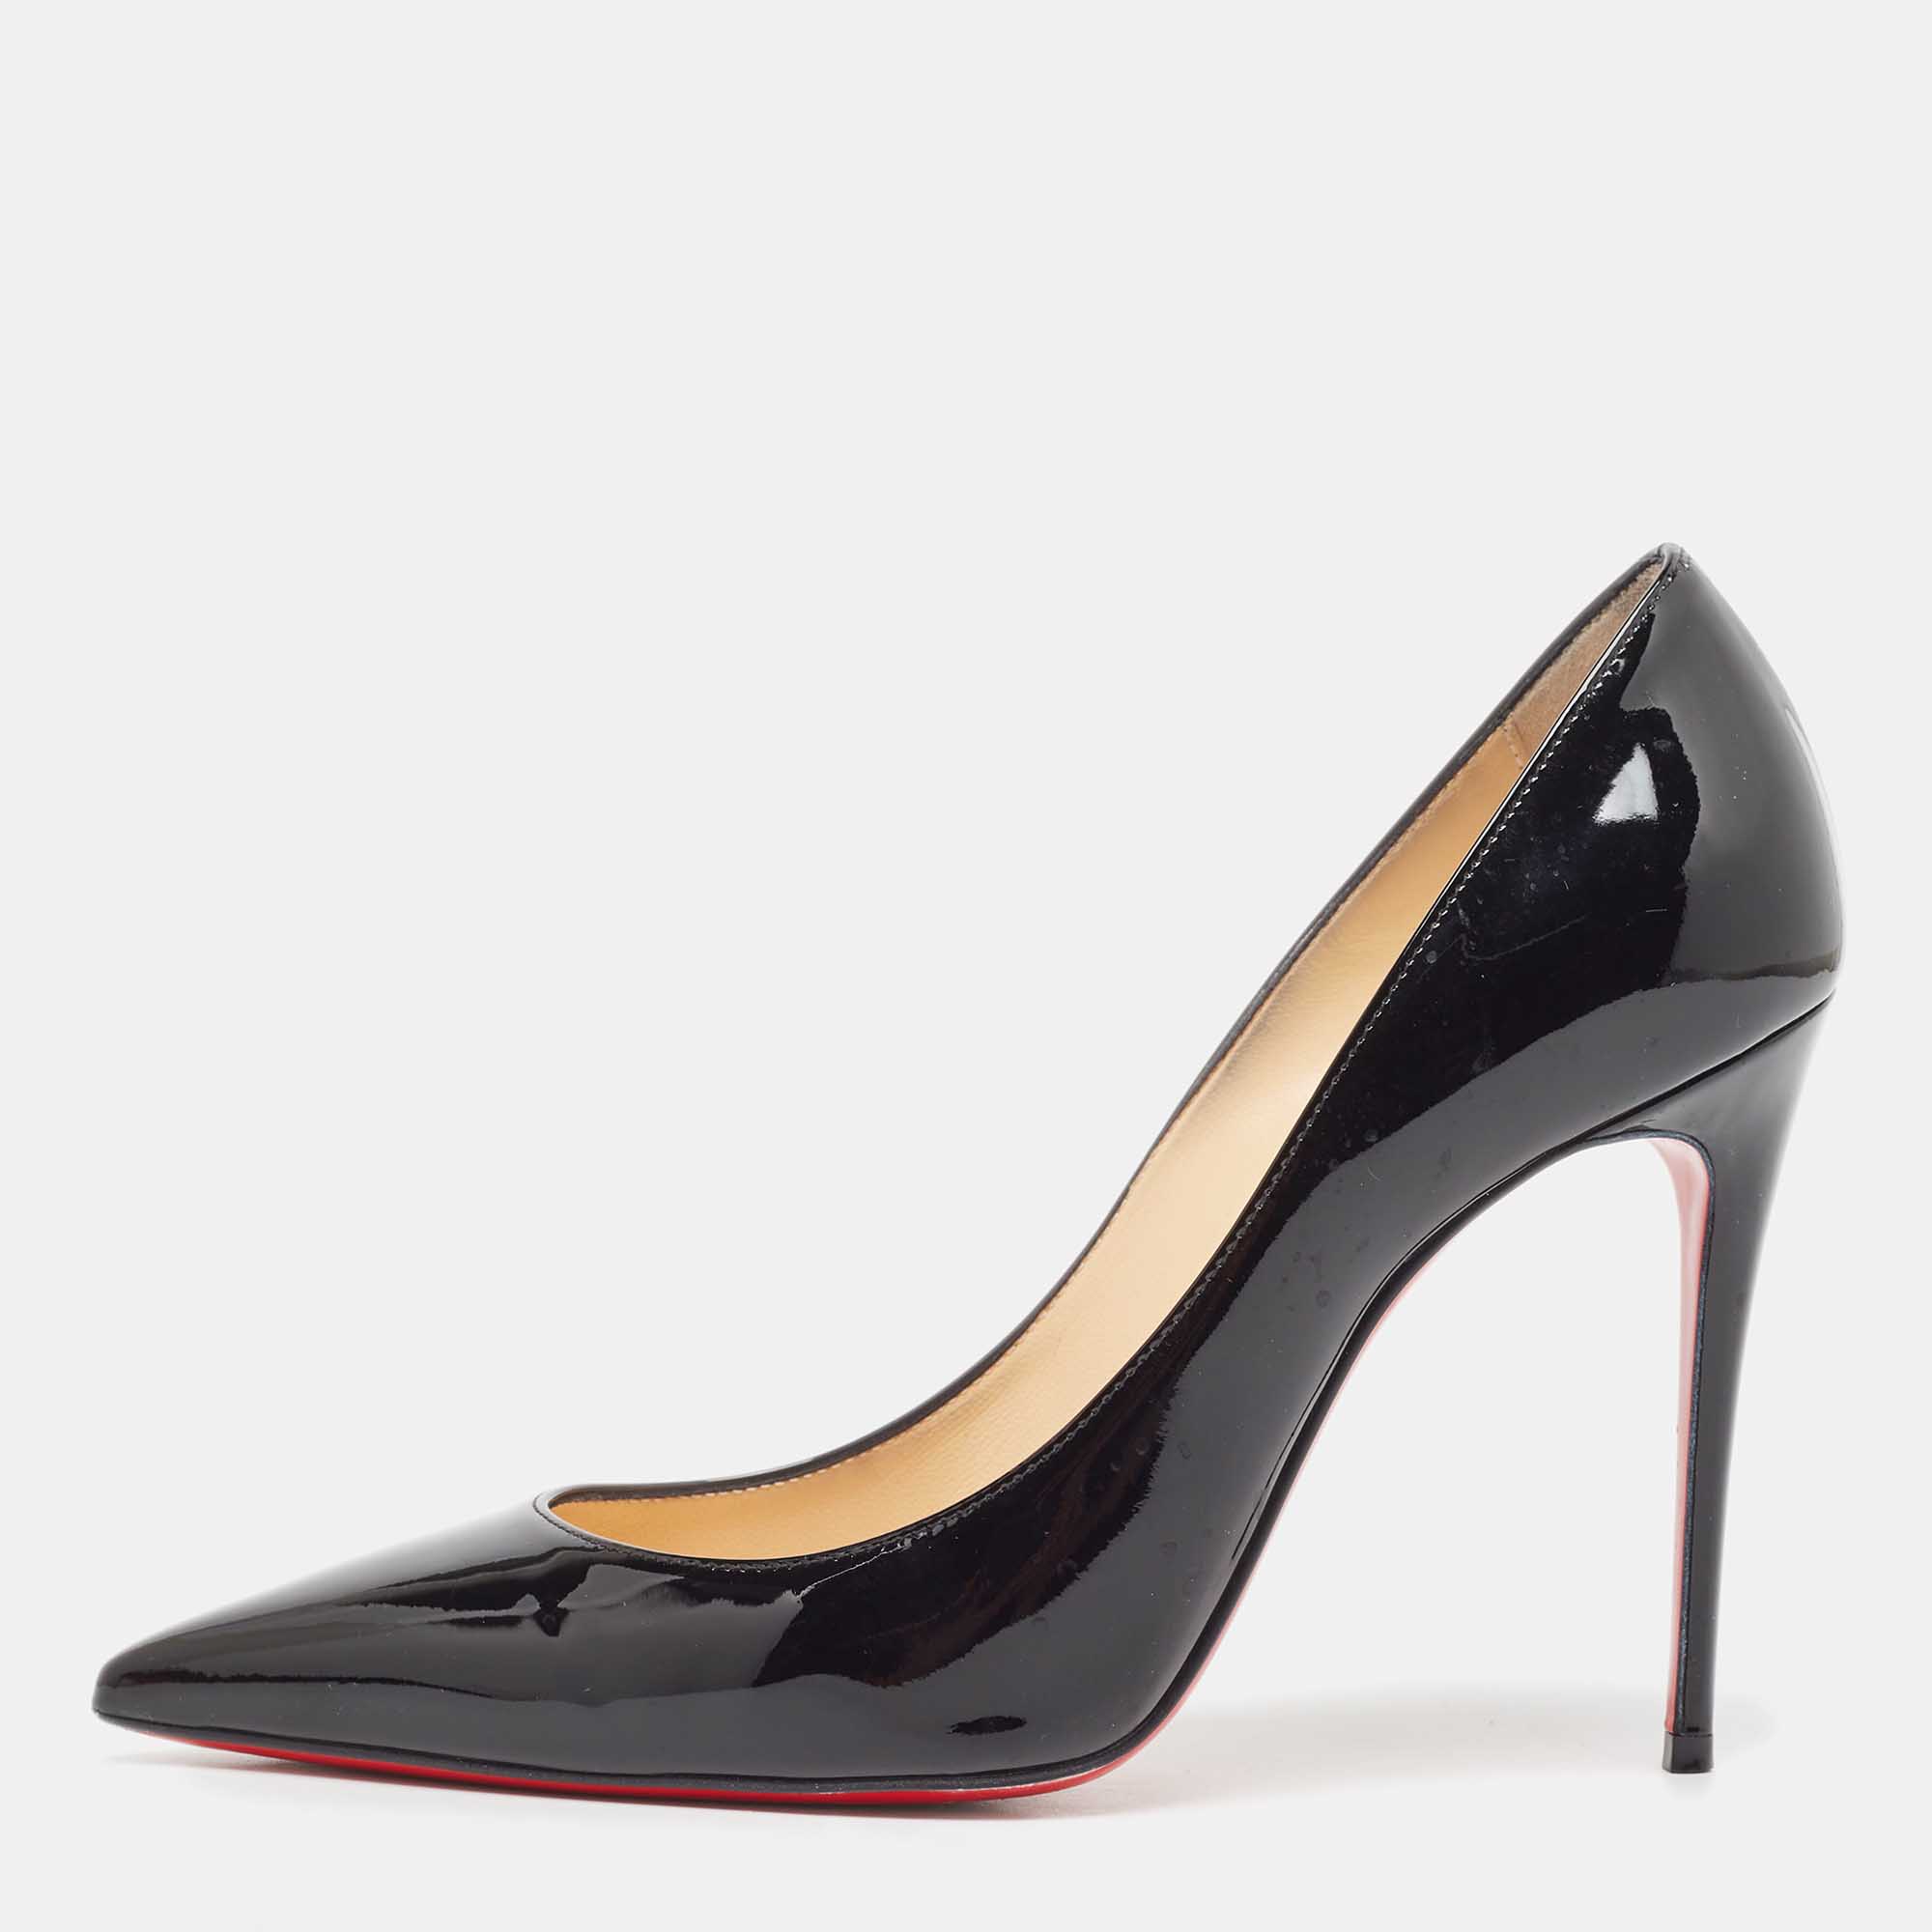 Pre-owned Christian Louboutin Black Patent Kate Pumps Size 37.5